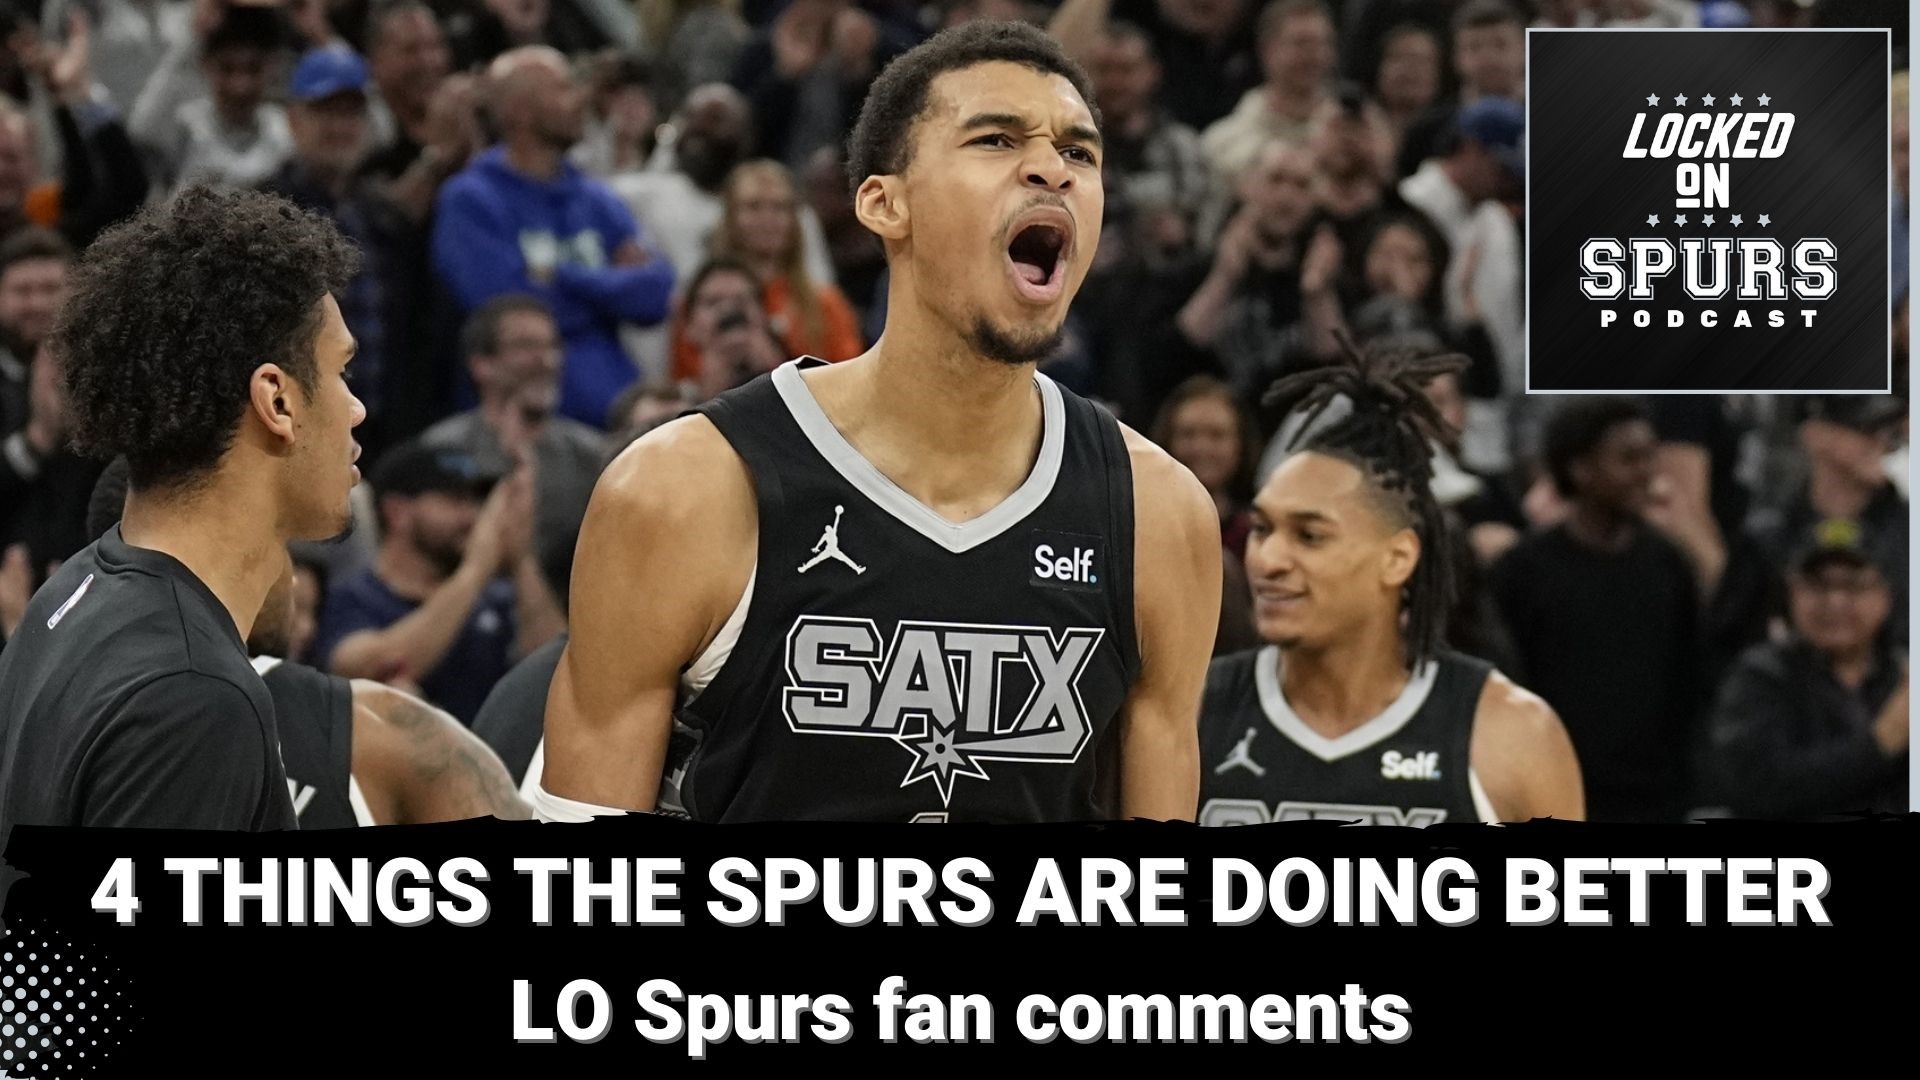 The Spurs are showing some signs of improvement.